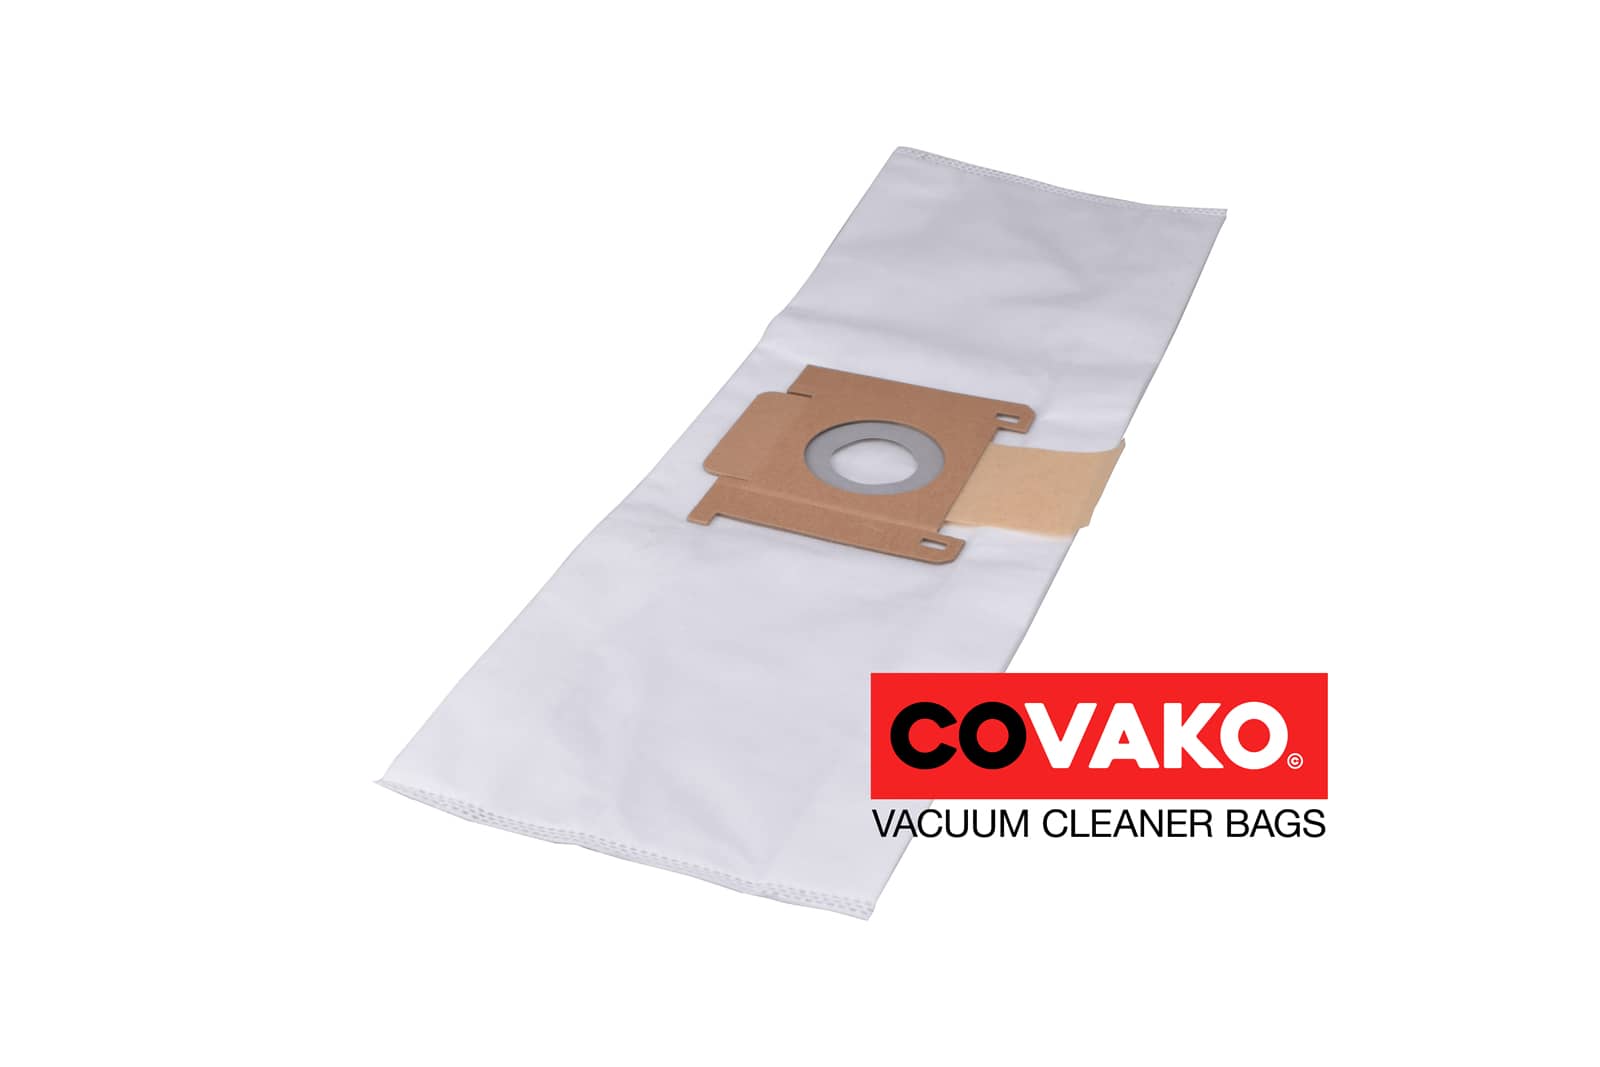 Ivac C 06 / Synthesis - Ivac vacuum cleaner bags